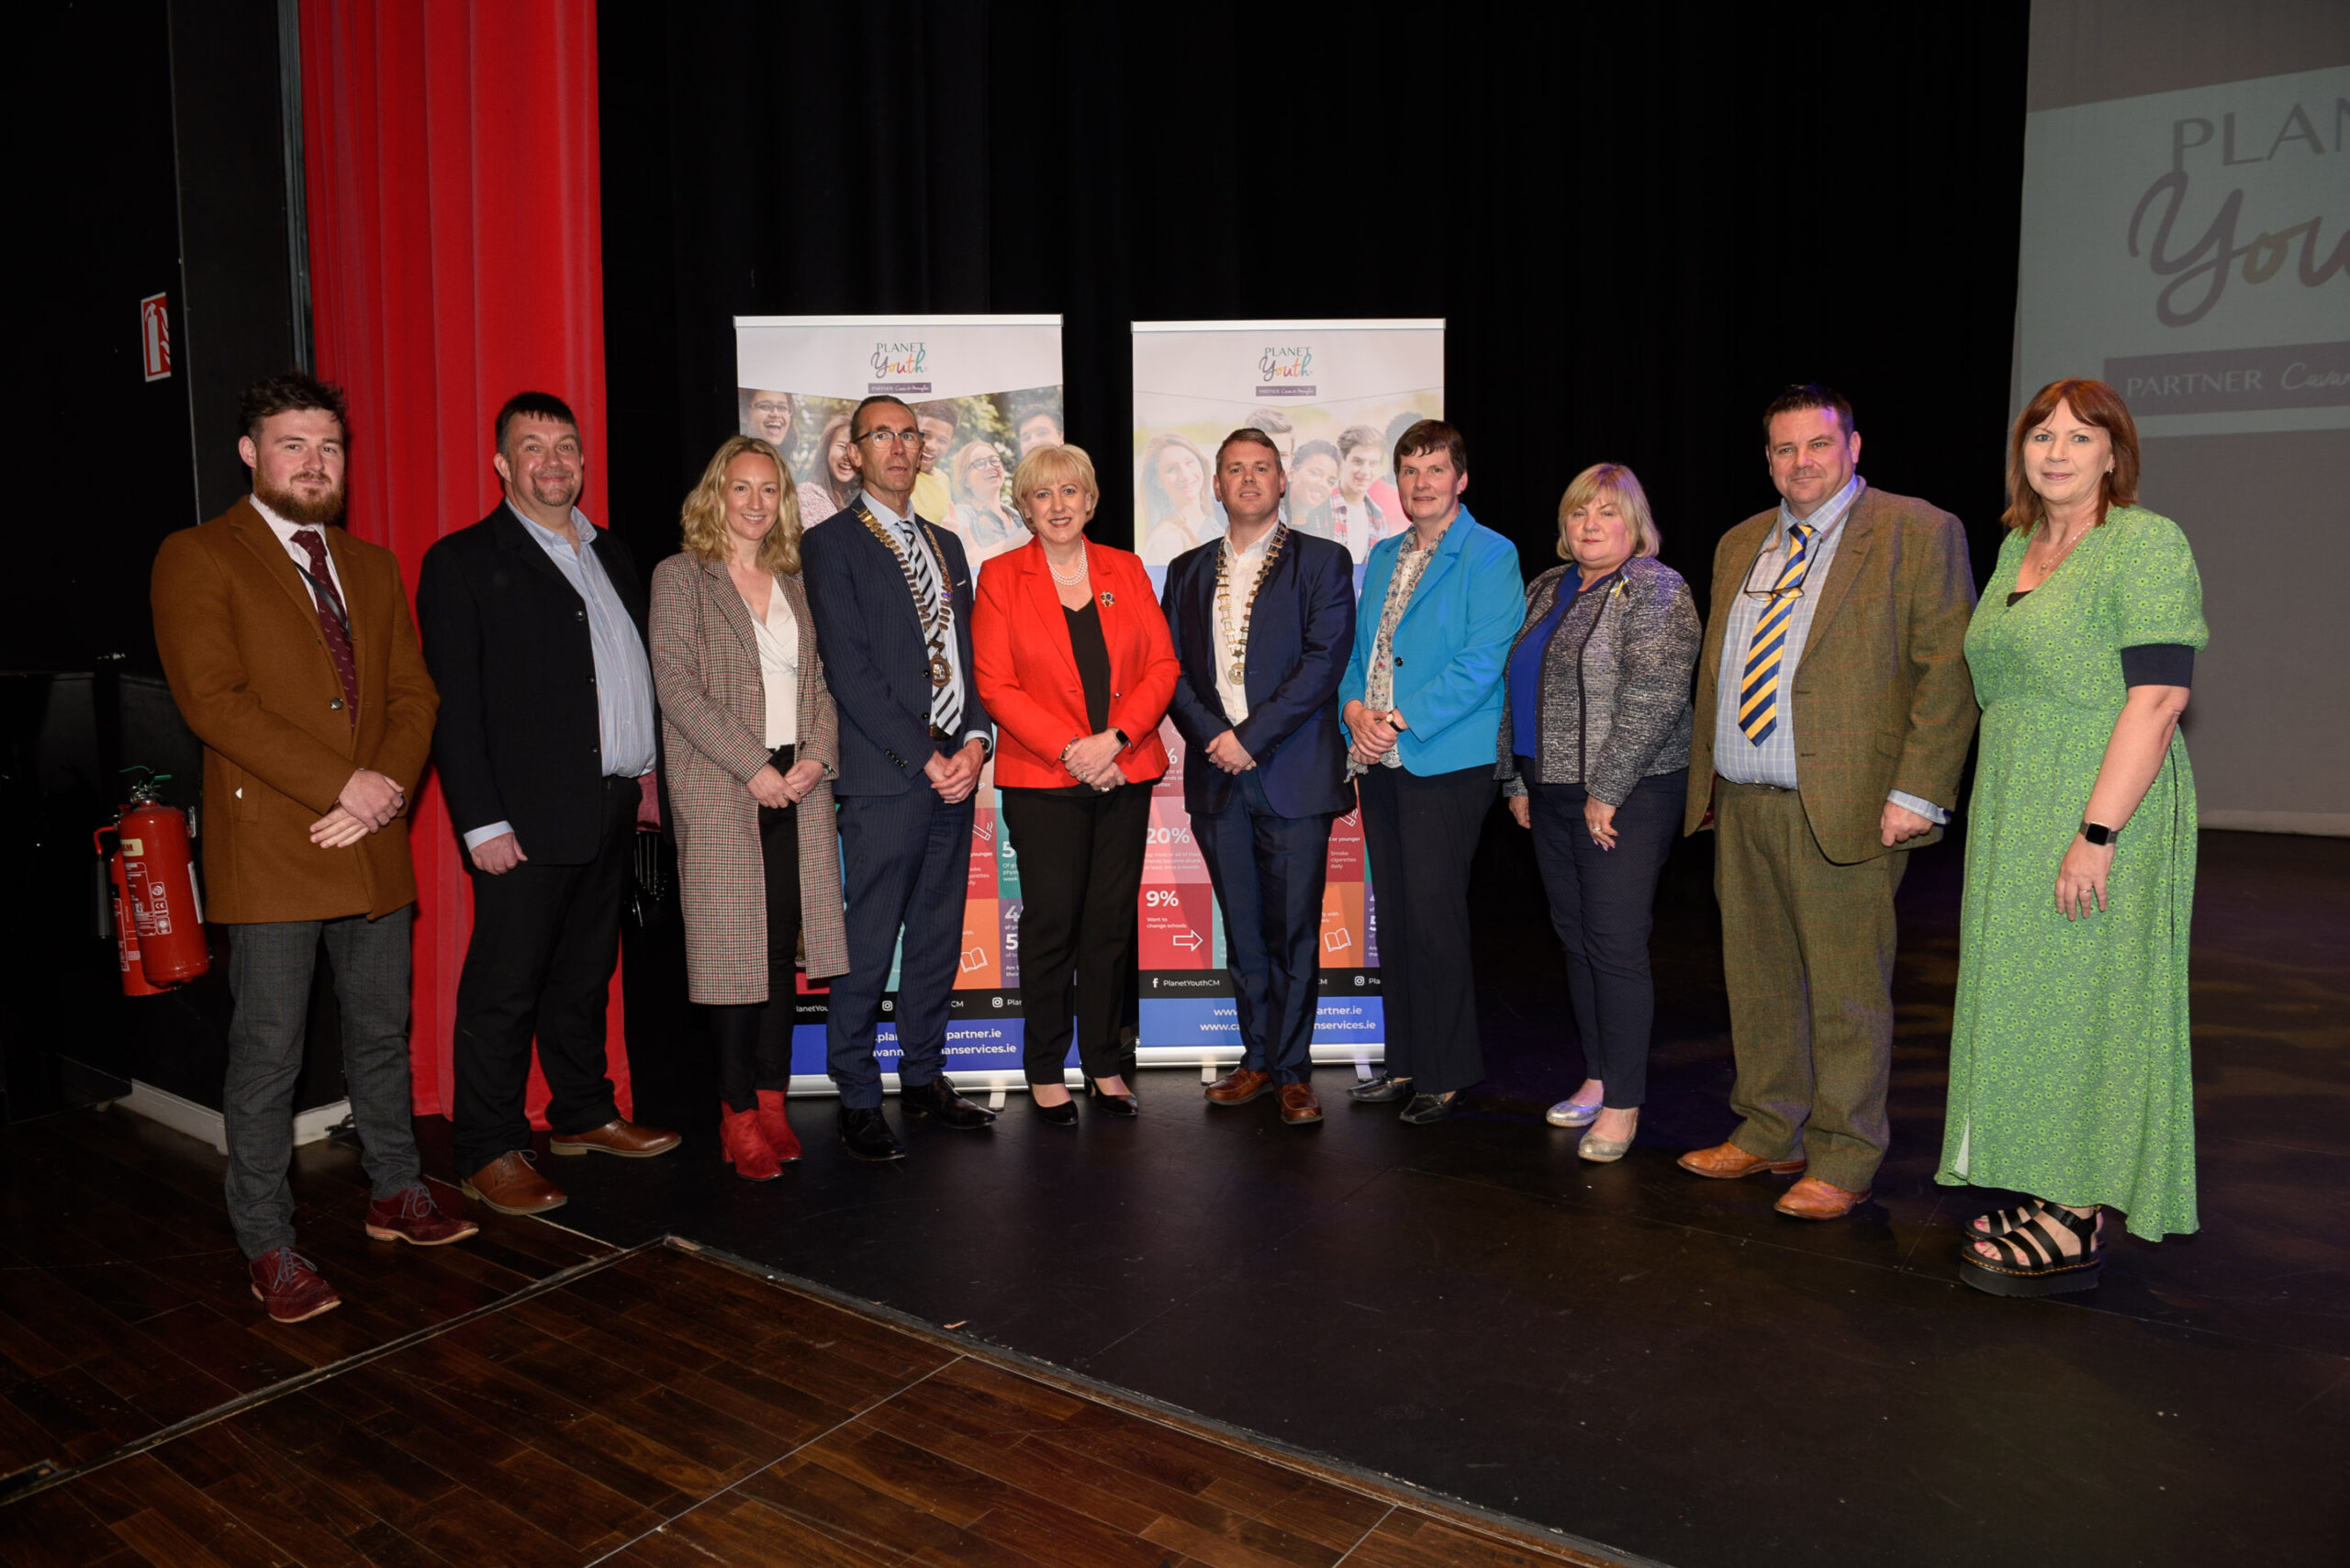 Planet Youth Cavan Monaghan Launch Event 2022